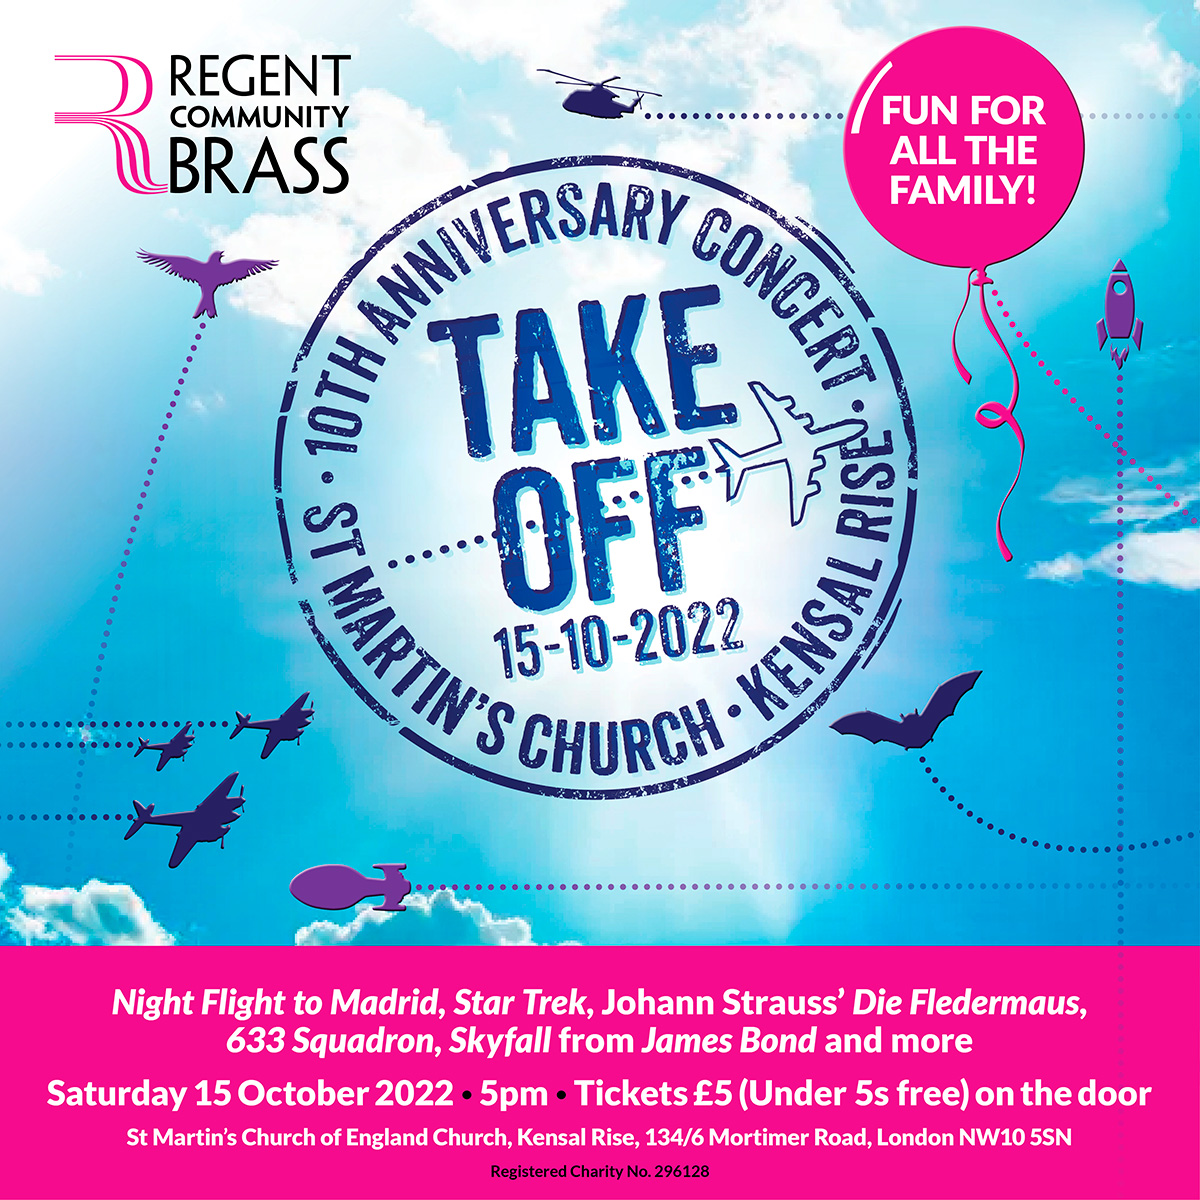 🚁🚀✈️ #Countdown to our “Take Off” flight themed concert at St Martin’s Kensal Rise on Sat 15th October. Fabulous brass band music for all the family inc James Bond, Star Trek, 633 Squadron… . . #kensalrise #nw10 #familyconcert #brassband @KensalQueensPk @StKensal @NW10KTRA